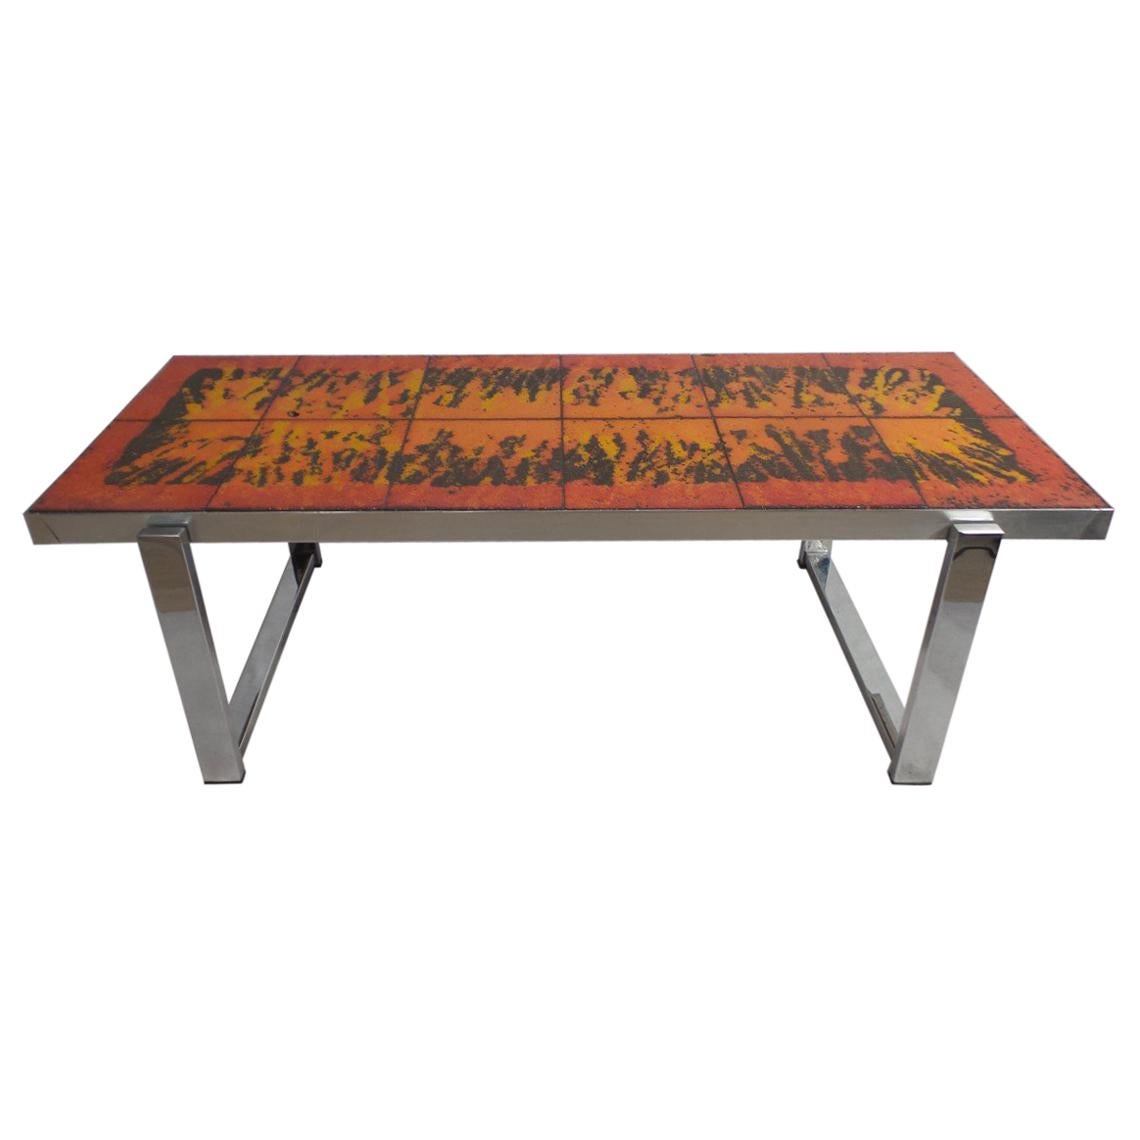 Exceptional Midcentury Bright Orange Fat Lava and Chrome Coffee Table, 1970s For Sale